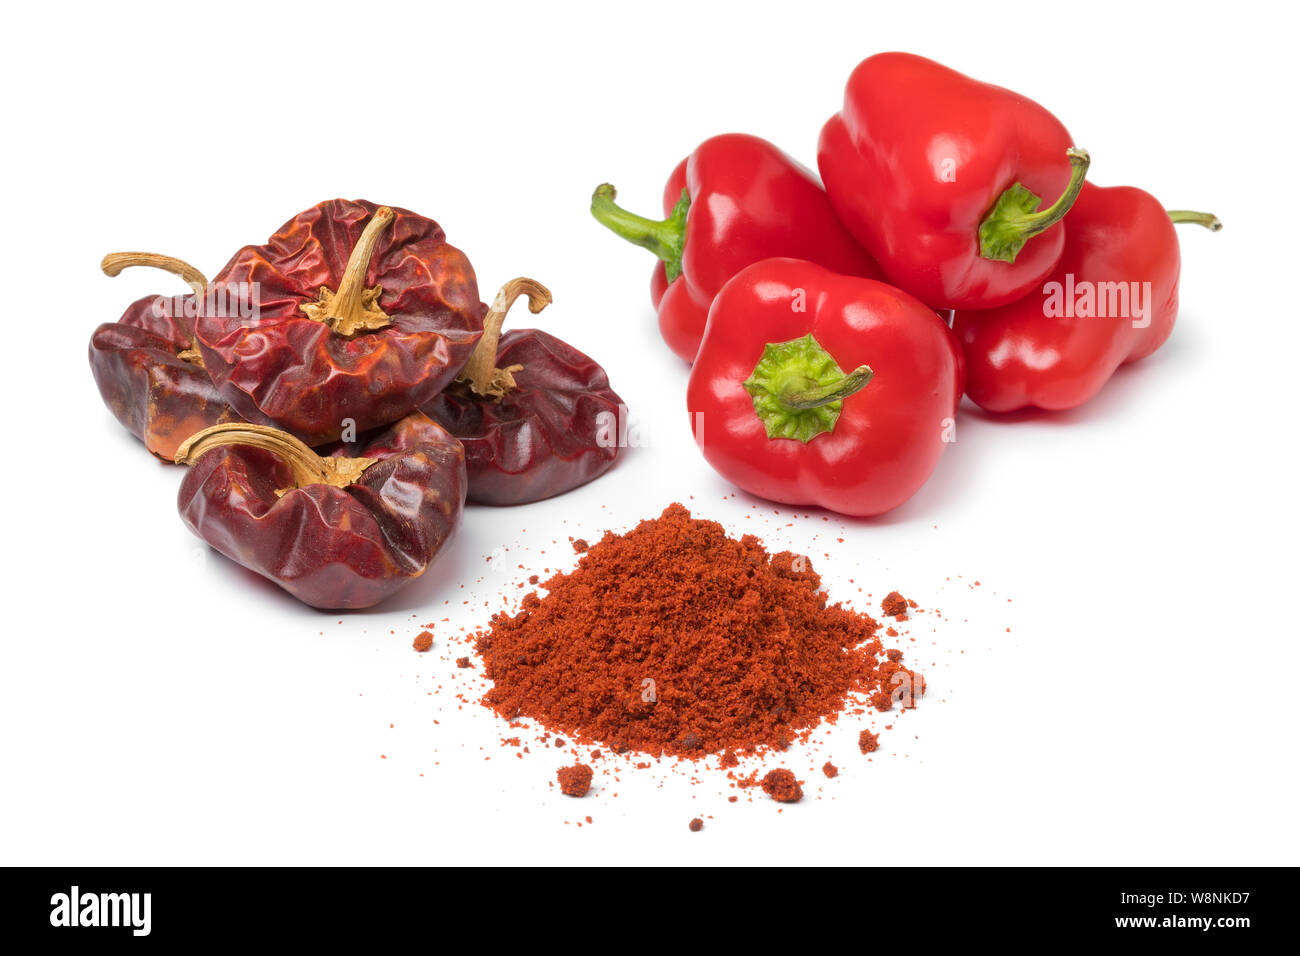 Dried and fresh red bell peppers and a heap of powder isolated on white background Stock Photo